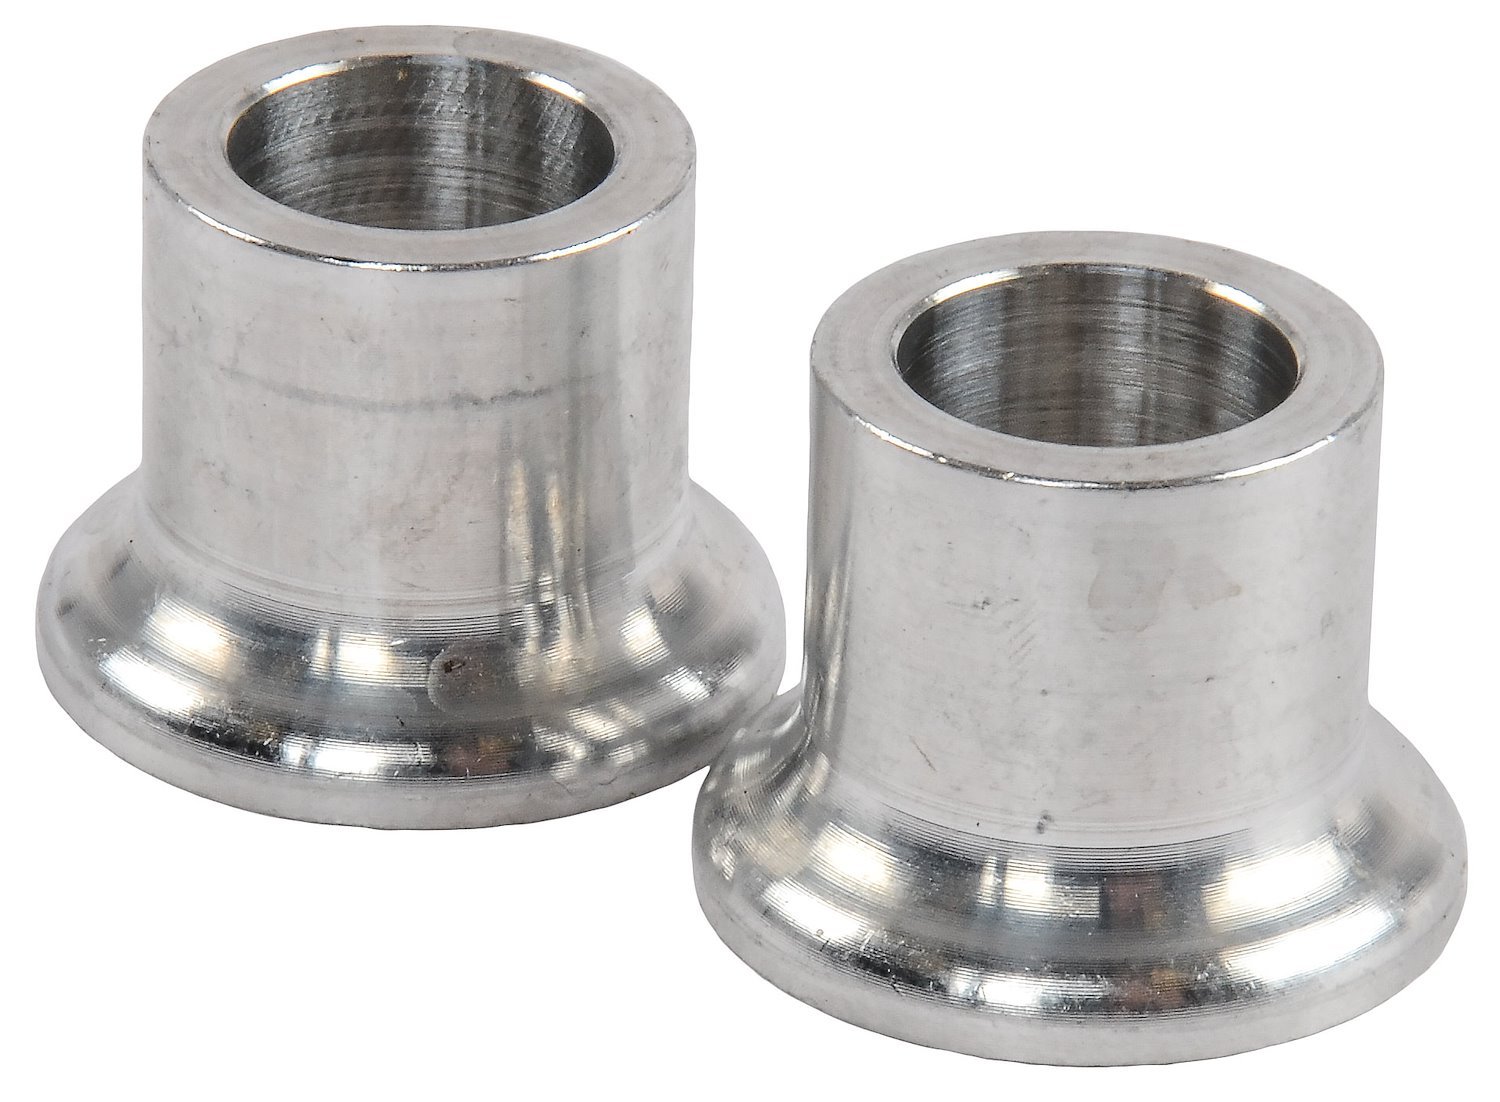 Aluminum Tapered Rod End Spacers 1/2 in. ID (Bolt Size) x 3/4 in. L